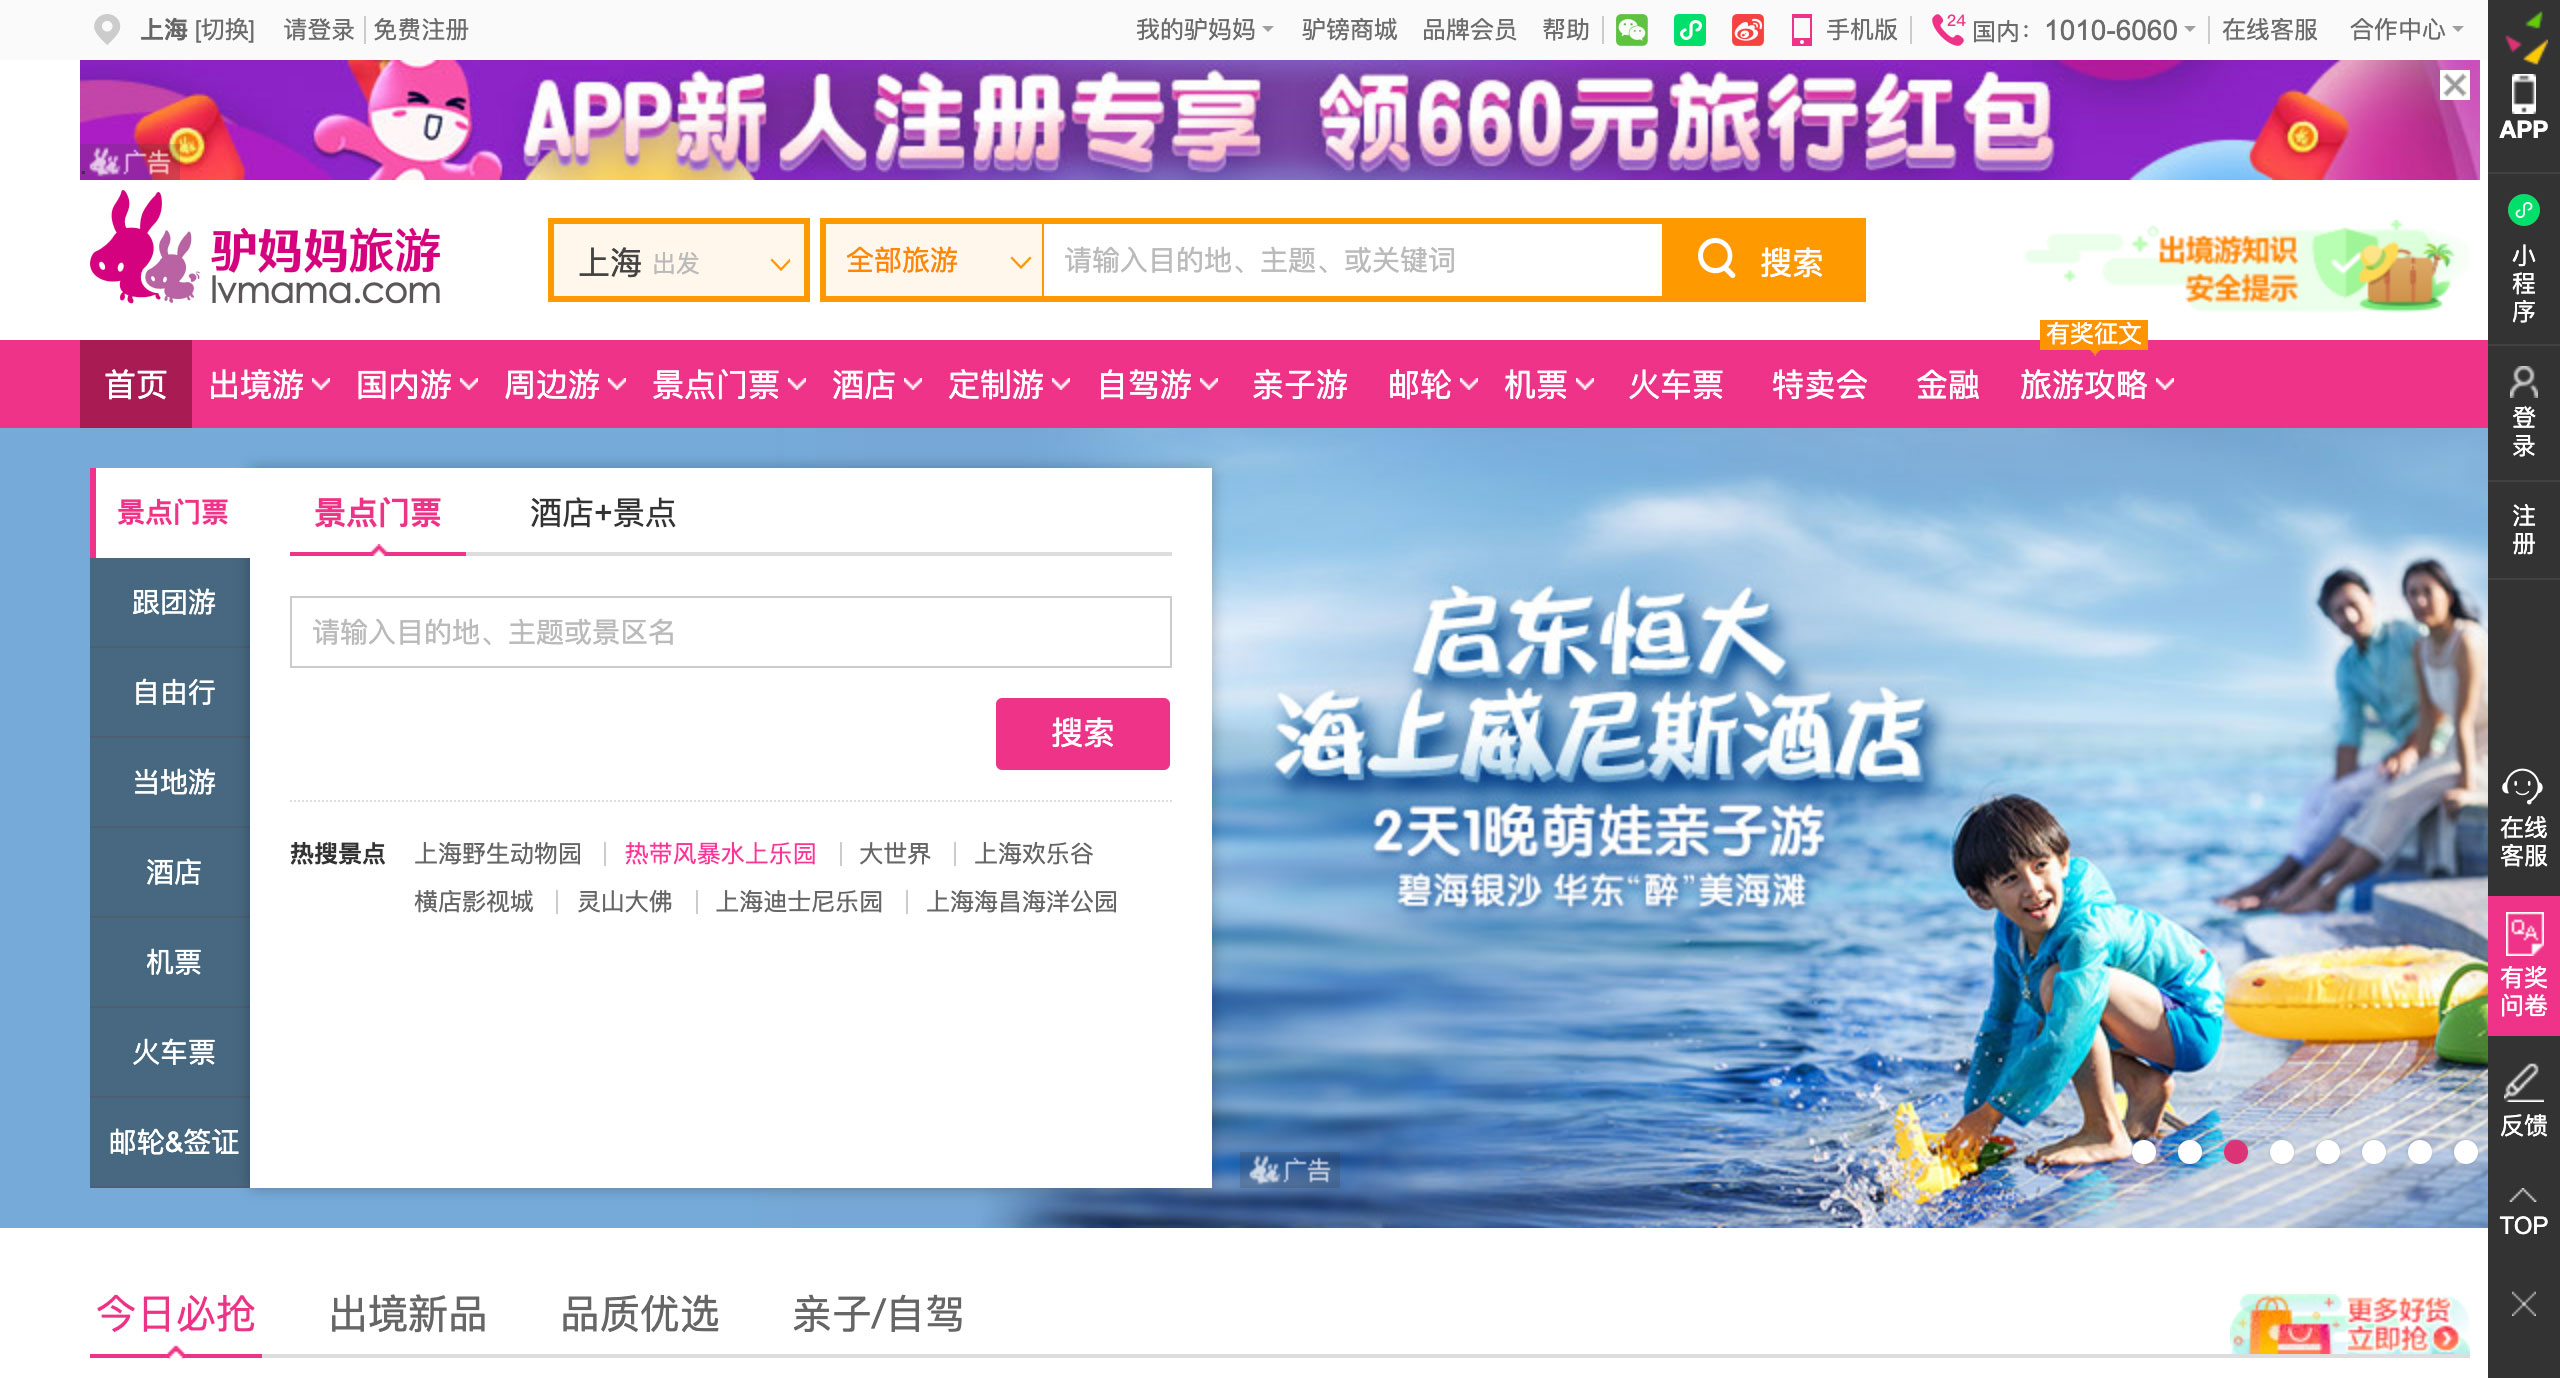 online travel agency in china